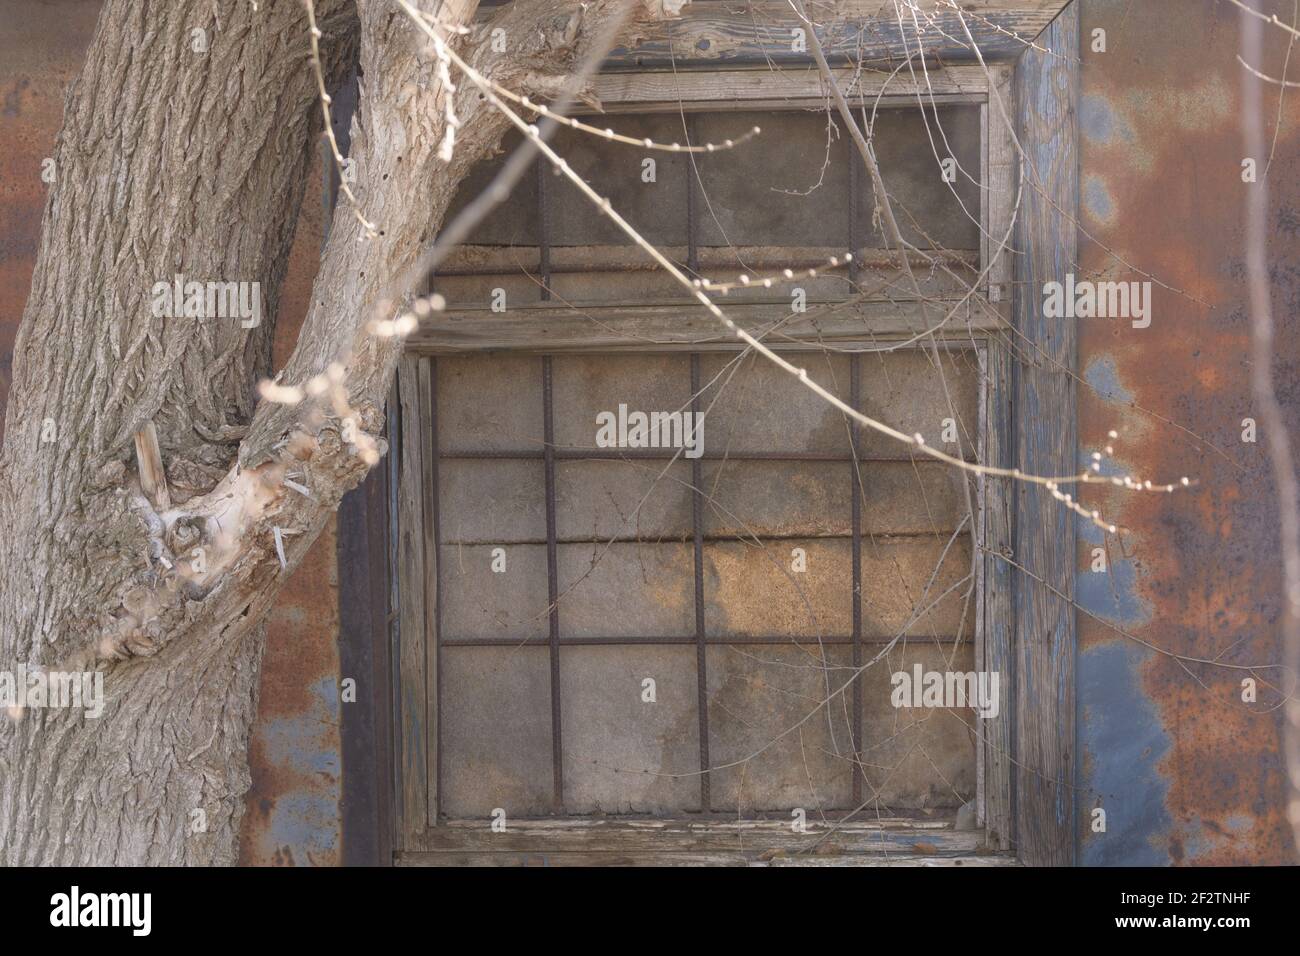 Closed window on old building with iron bars. Rust and peeling paint on walls of facade. Stock Photo